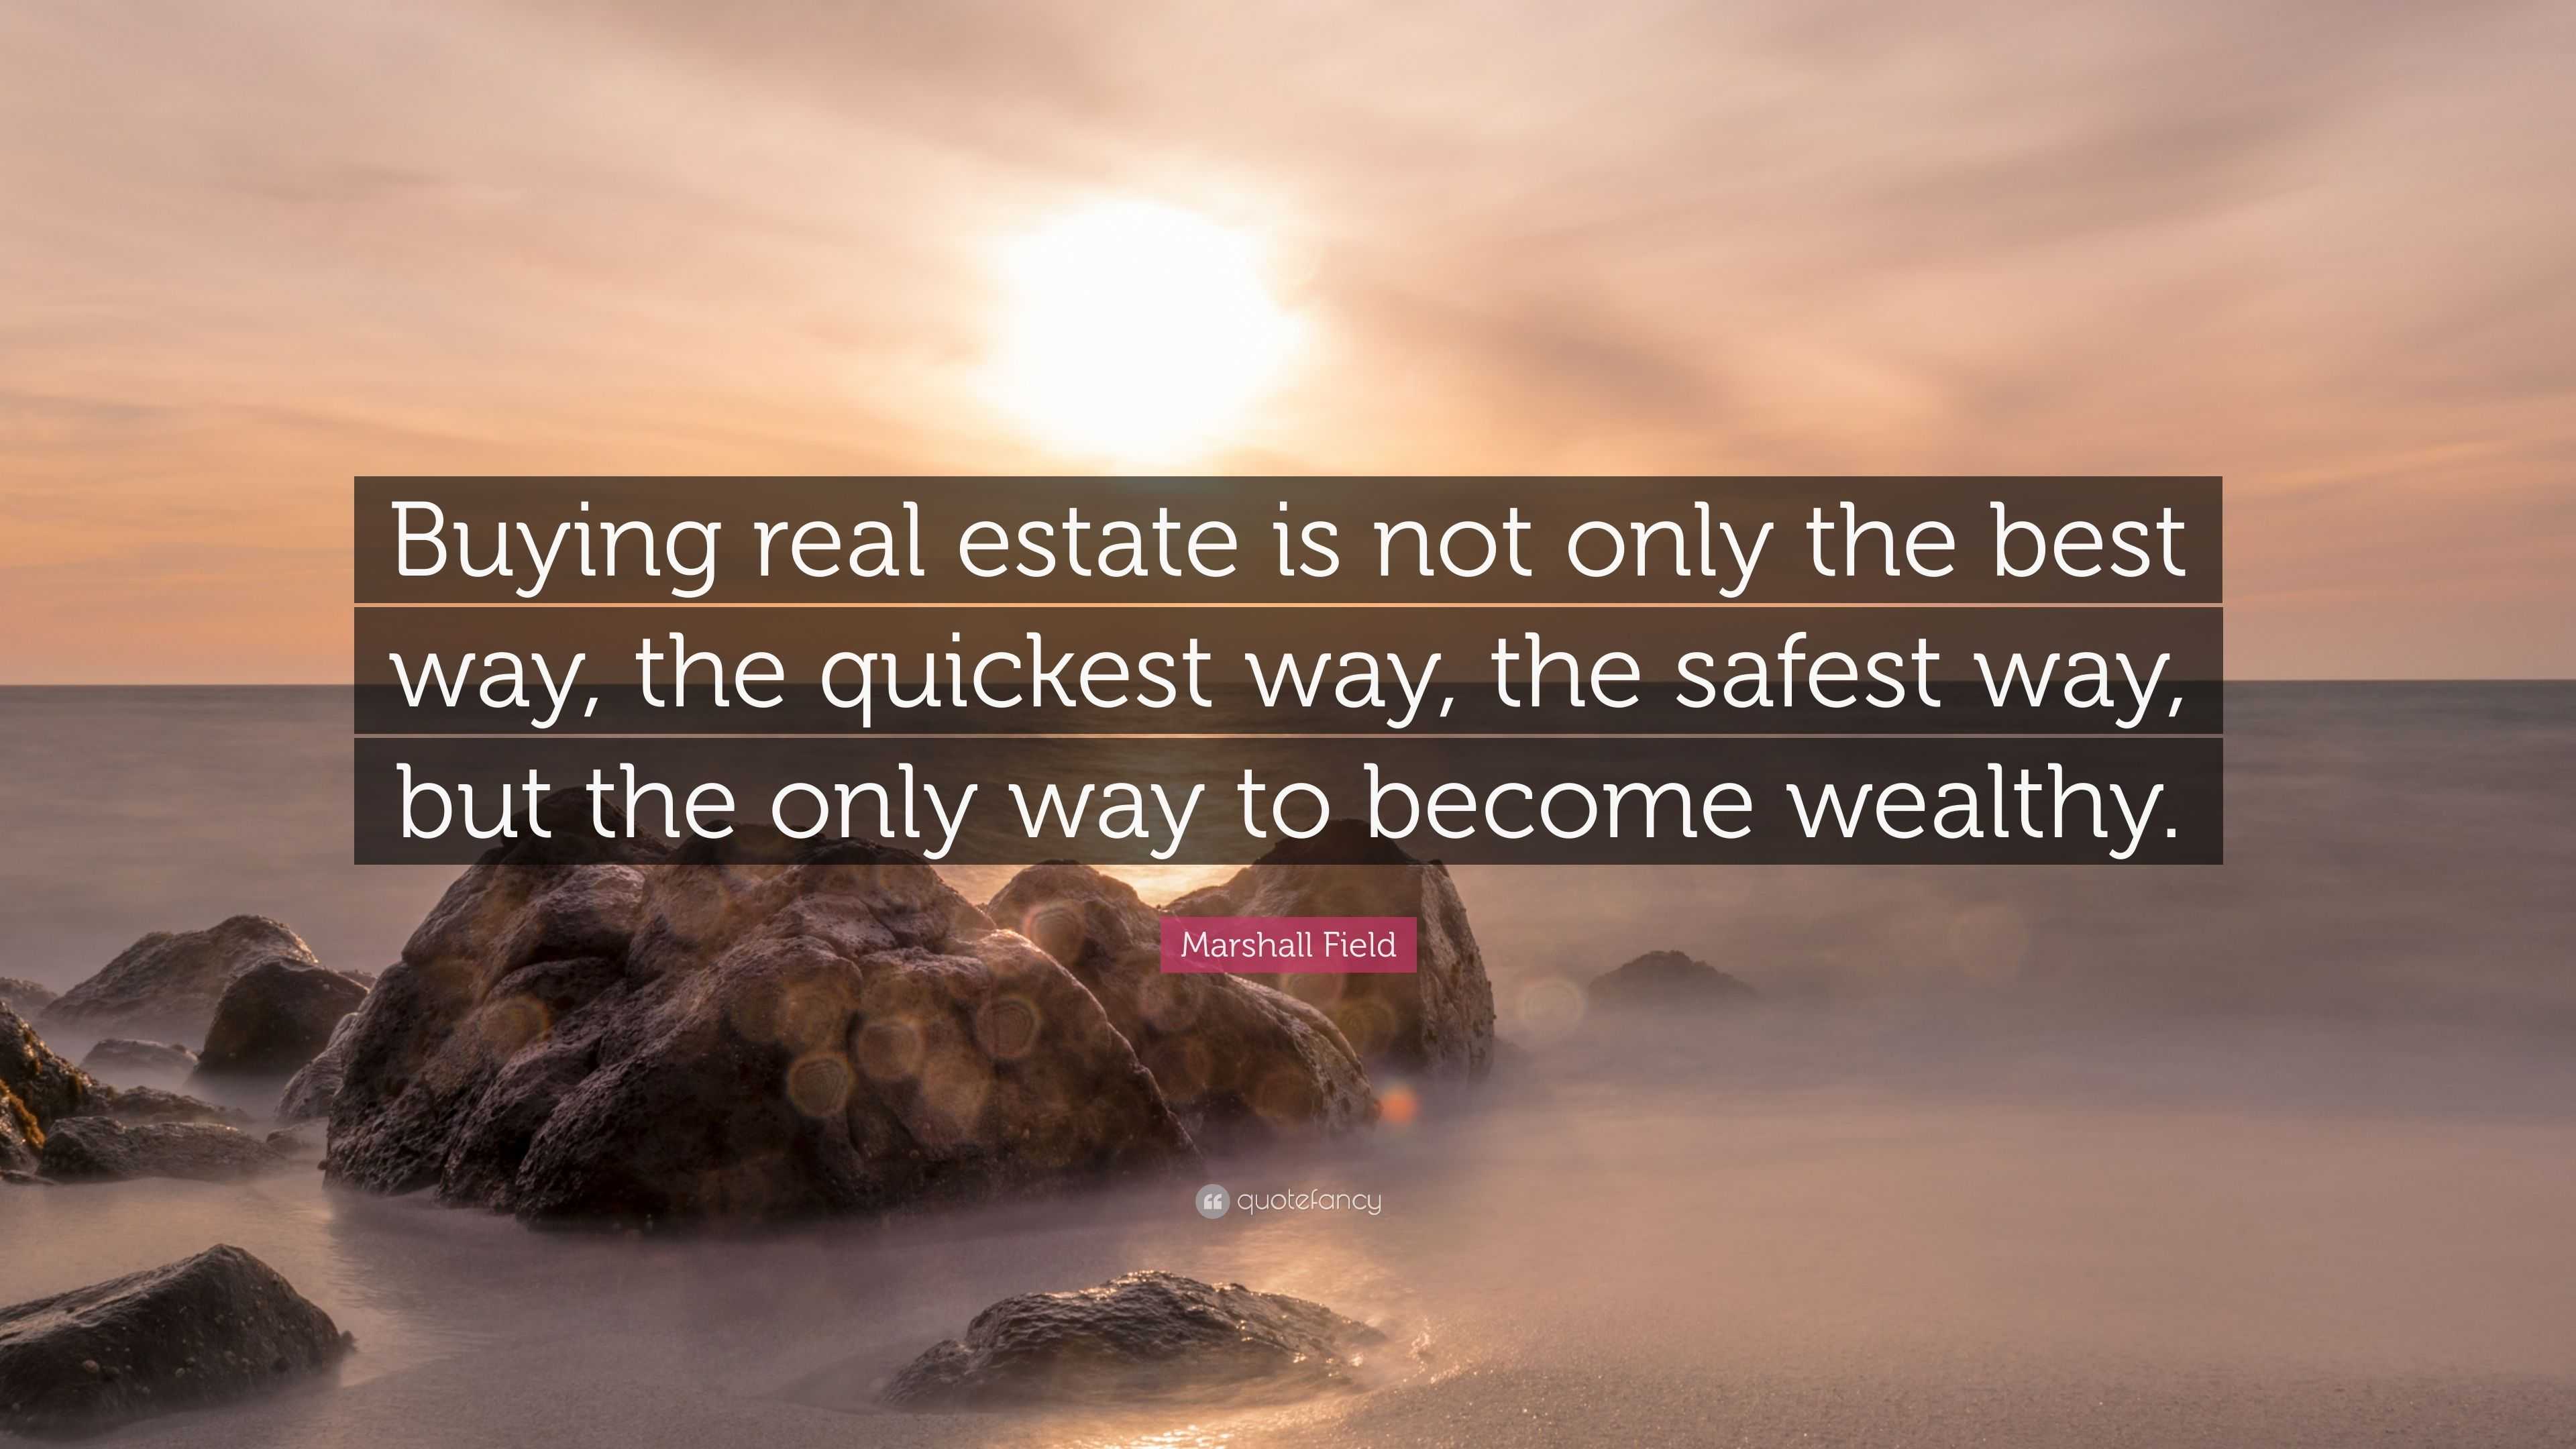 Marshall Field Quote: “Buying real estate is not only the best way, the